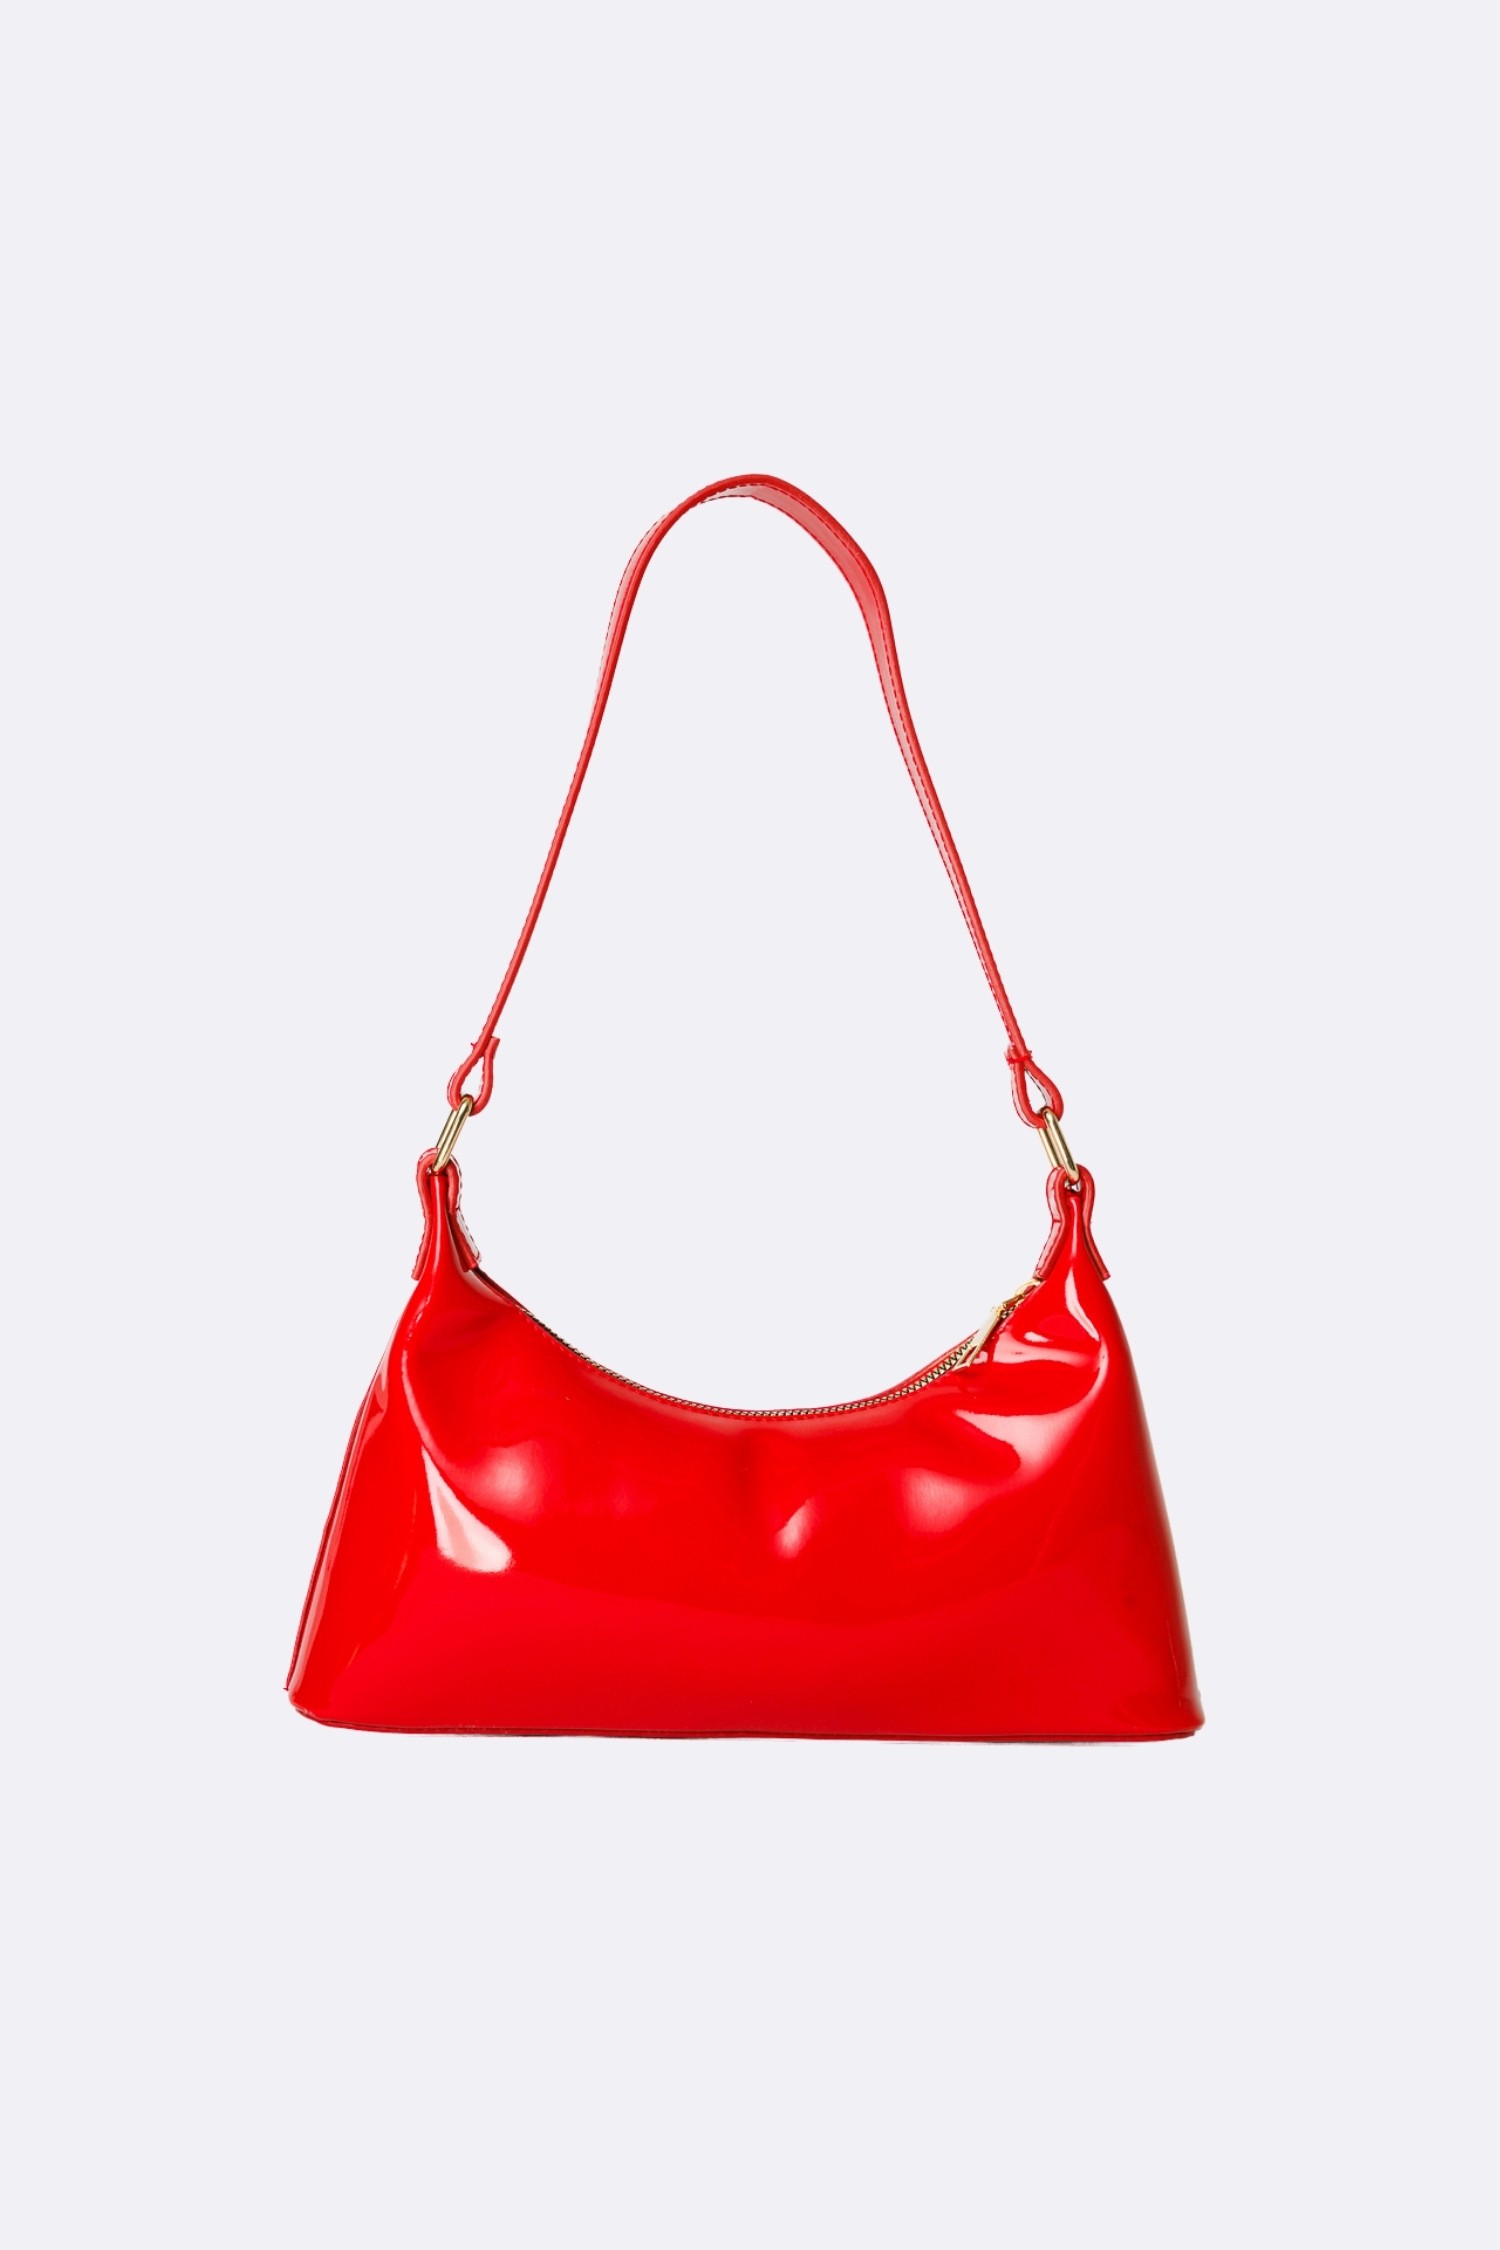 Garden Patent Leather Bag - Red